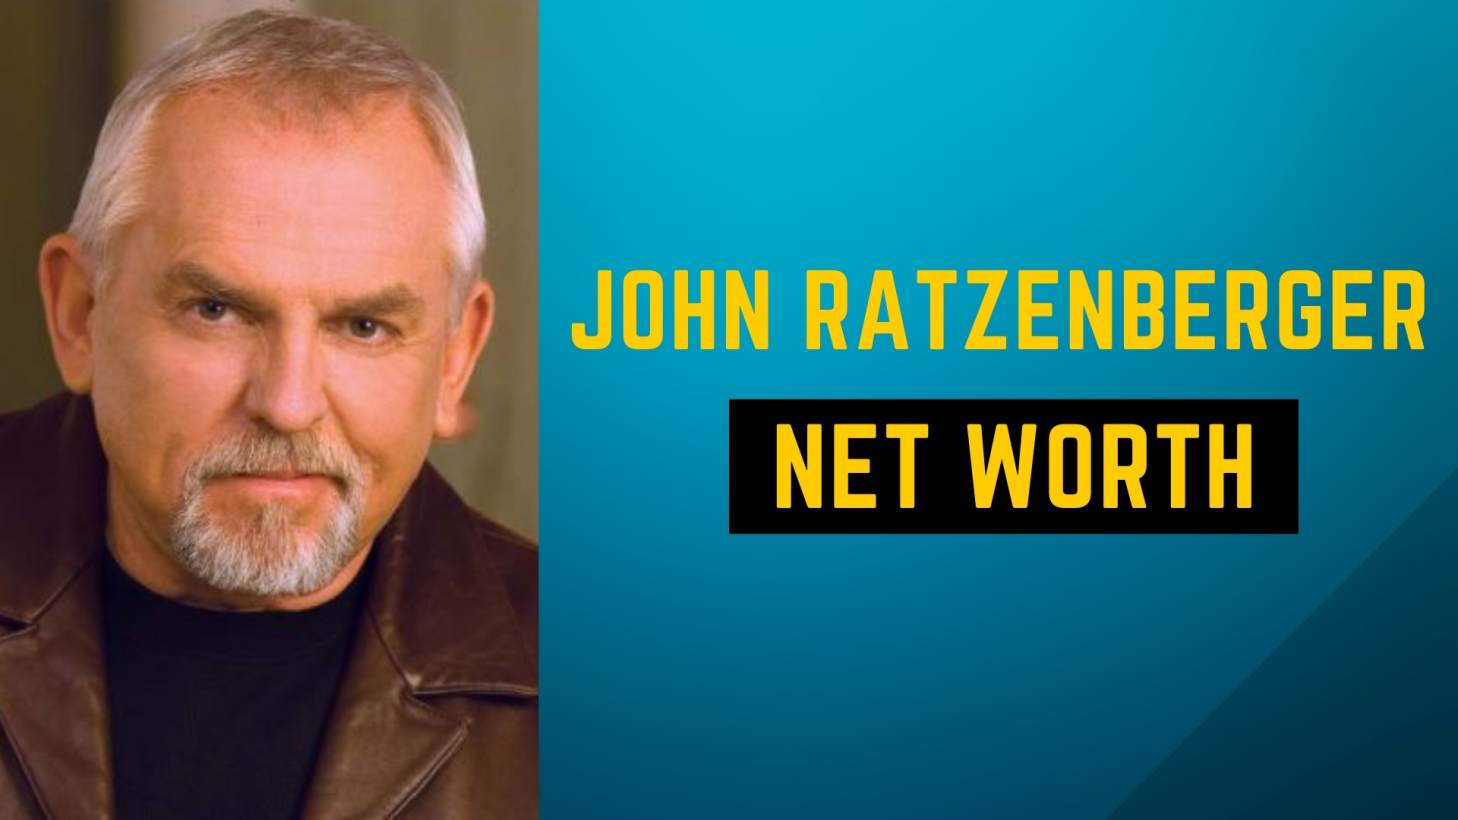 John Ratzenberger Net Worth 2022: Income, Bio, Age, Family, Facts, Wife And More Information